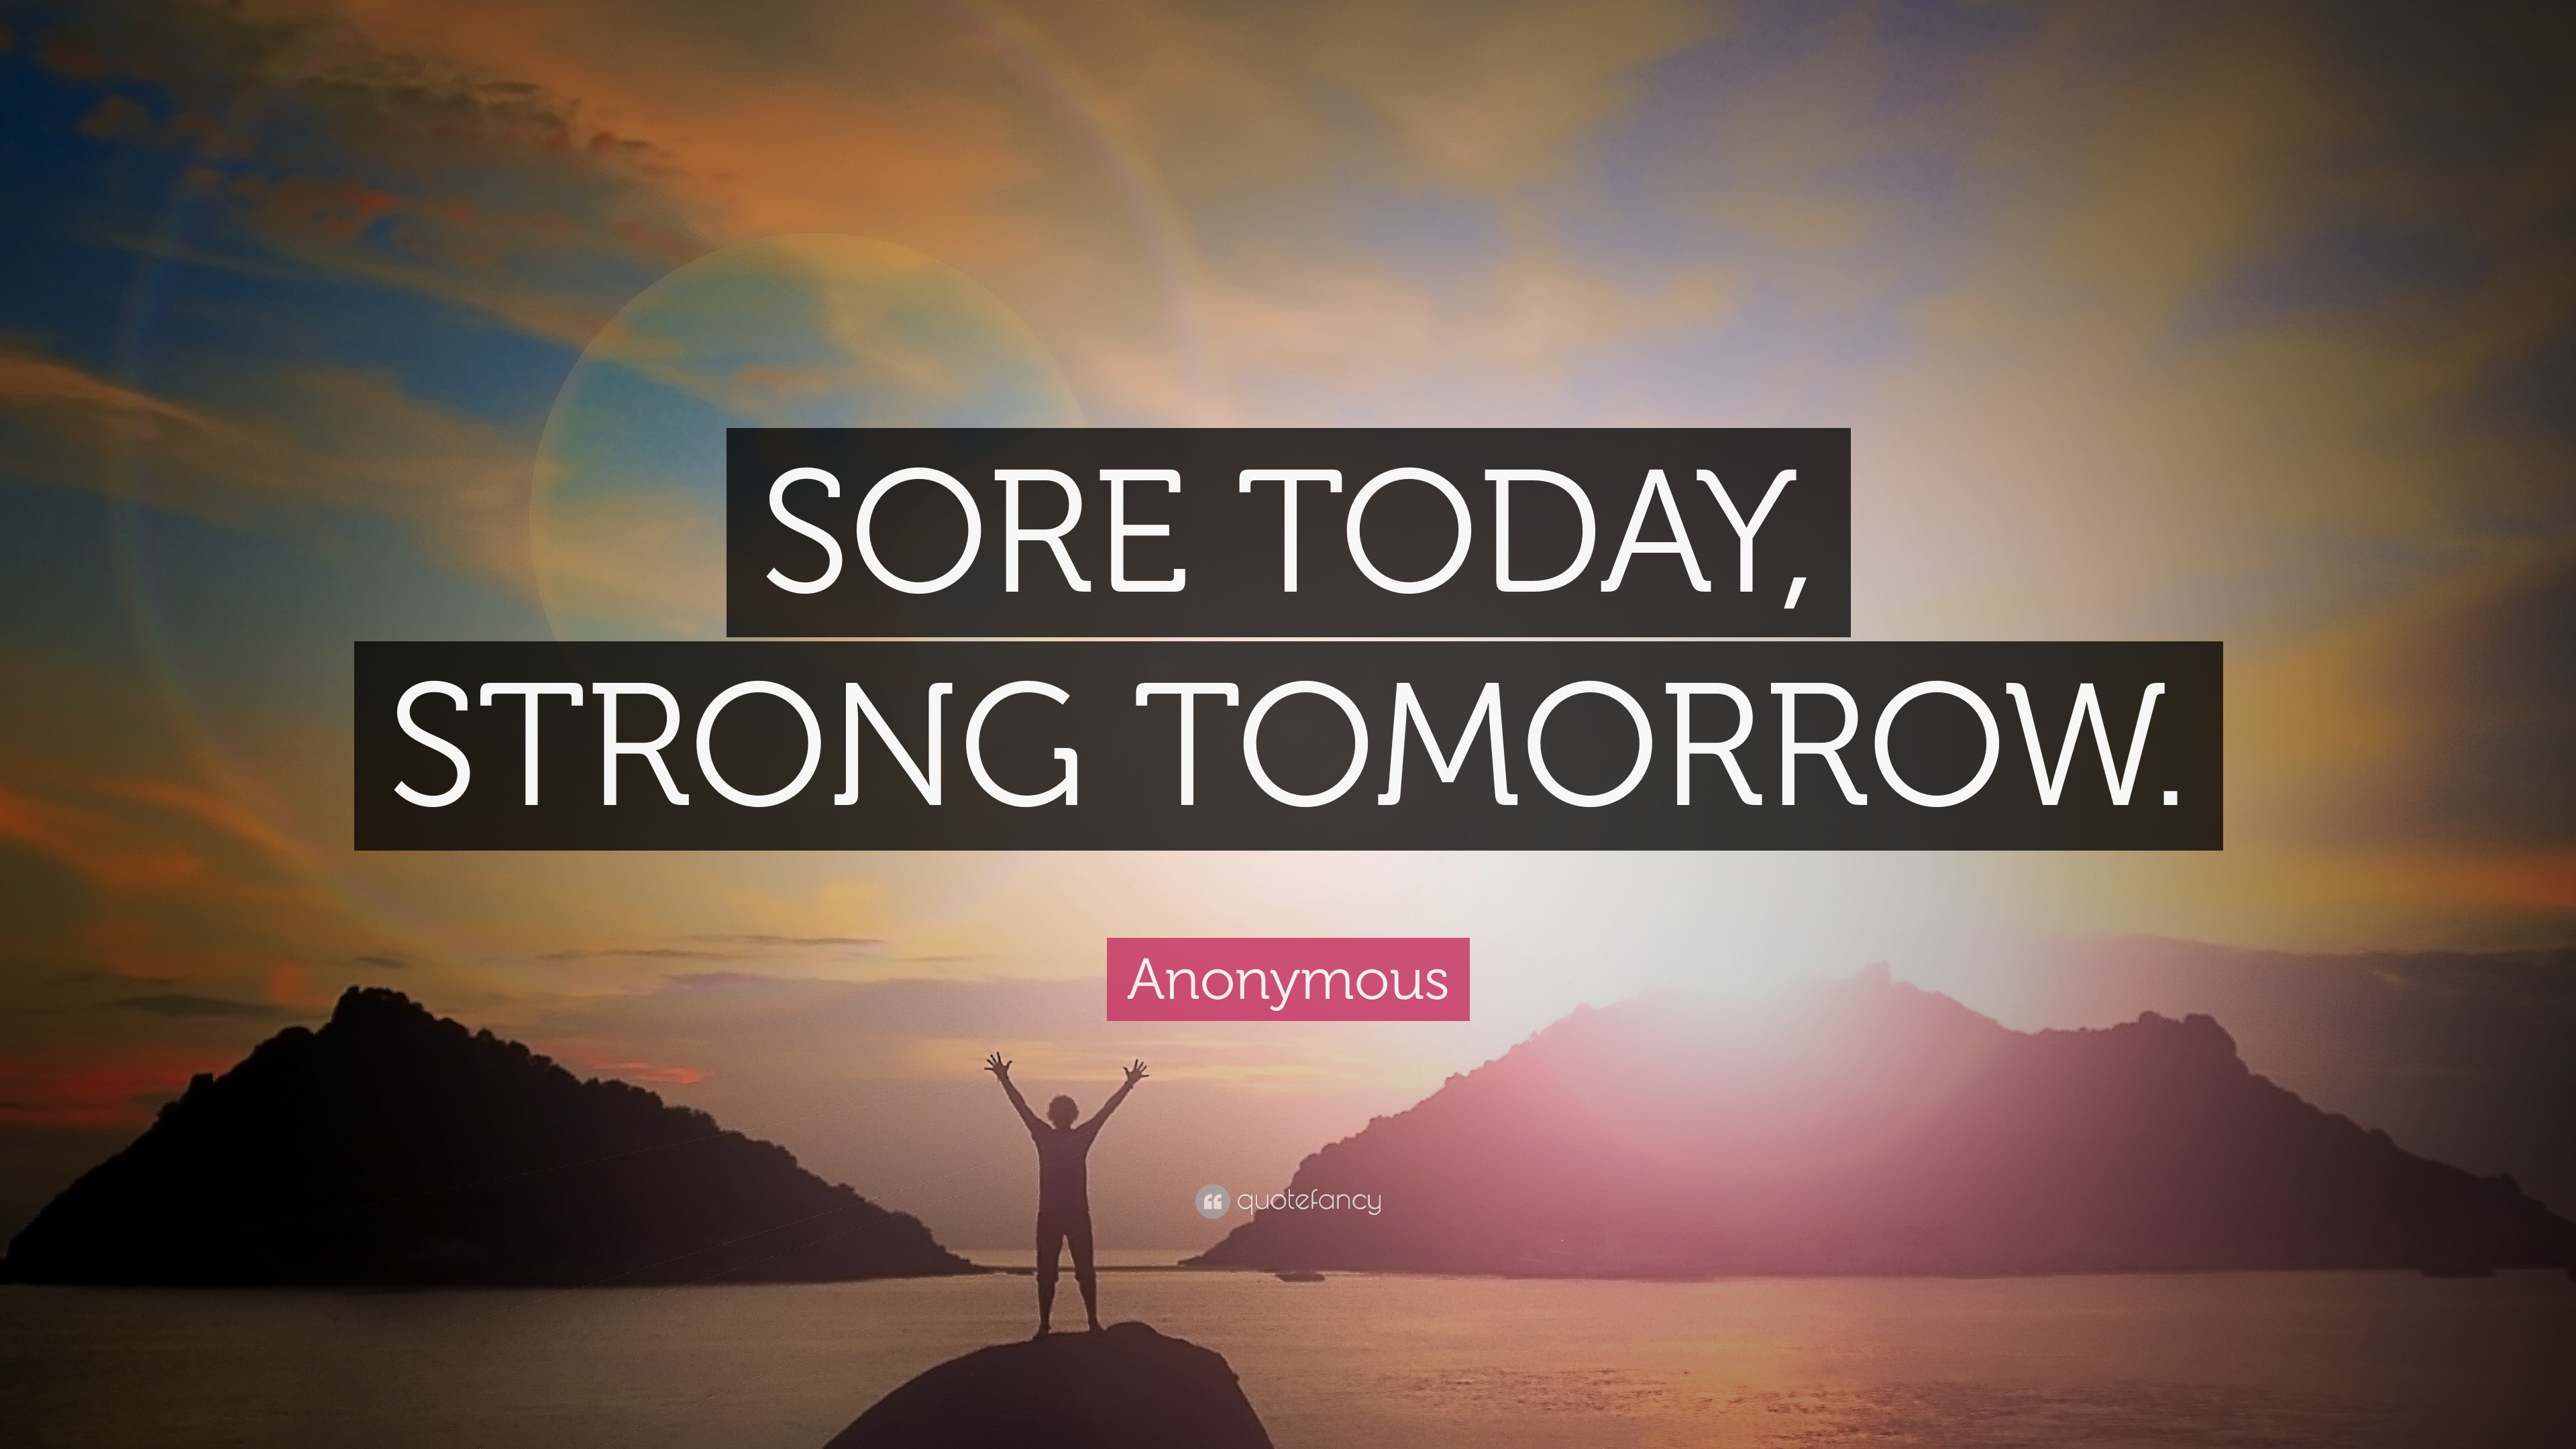 https://quotefancy.com/media/wallpaper/3840x2160/4675643-Anonymous-Quote-SORE-TODAY-STRONG-TOMORROW.jpg